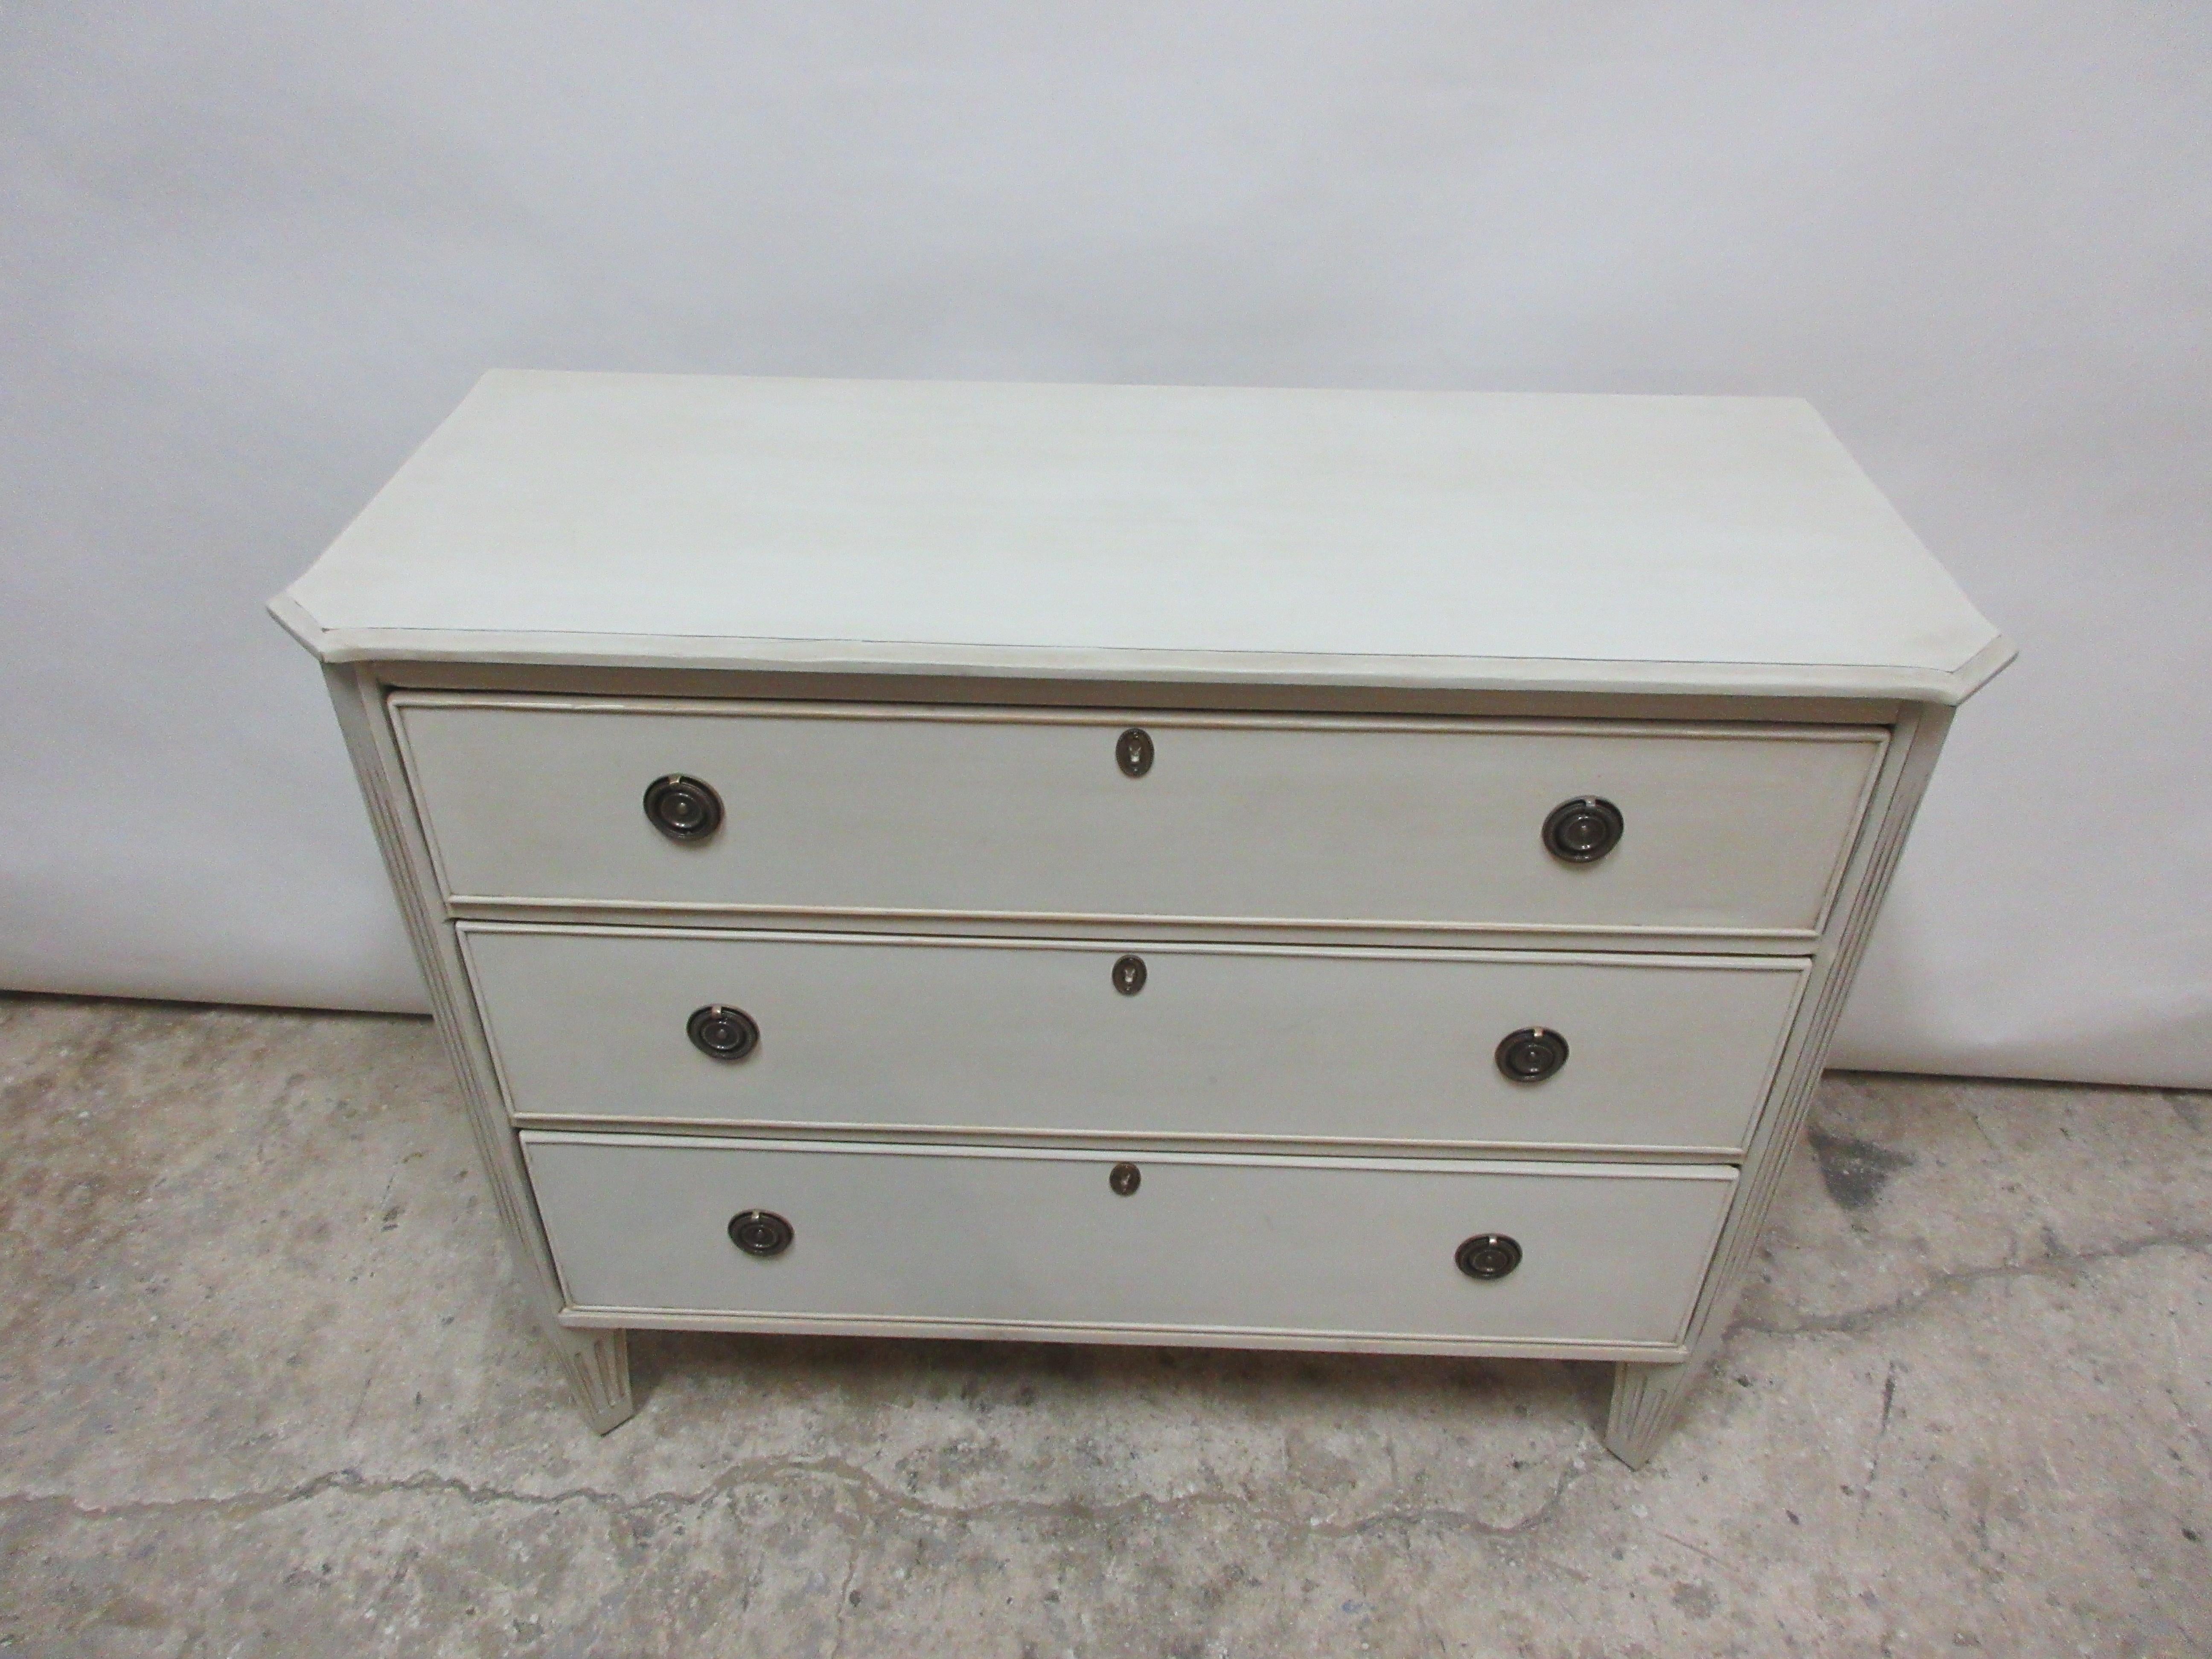 This is a 3 drawer Gustavian style chest, it has been restored and repainted with Milk Paints 